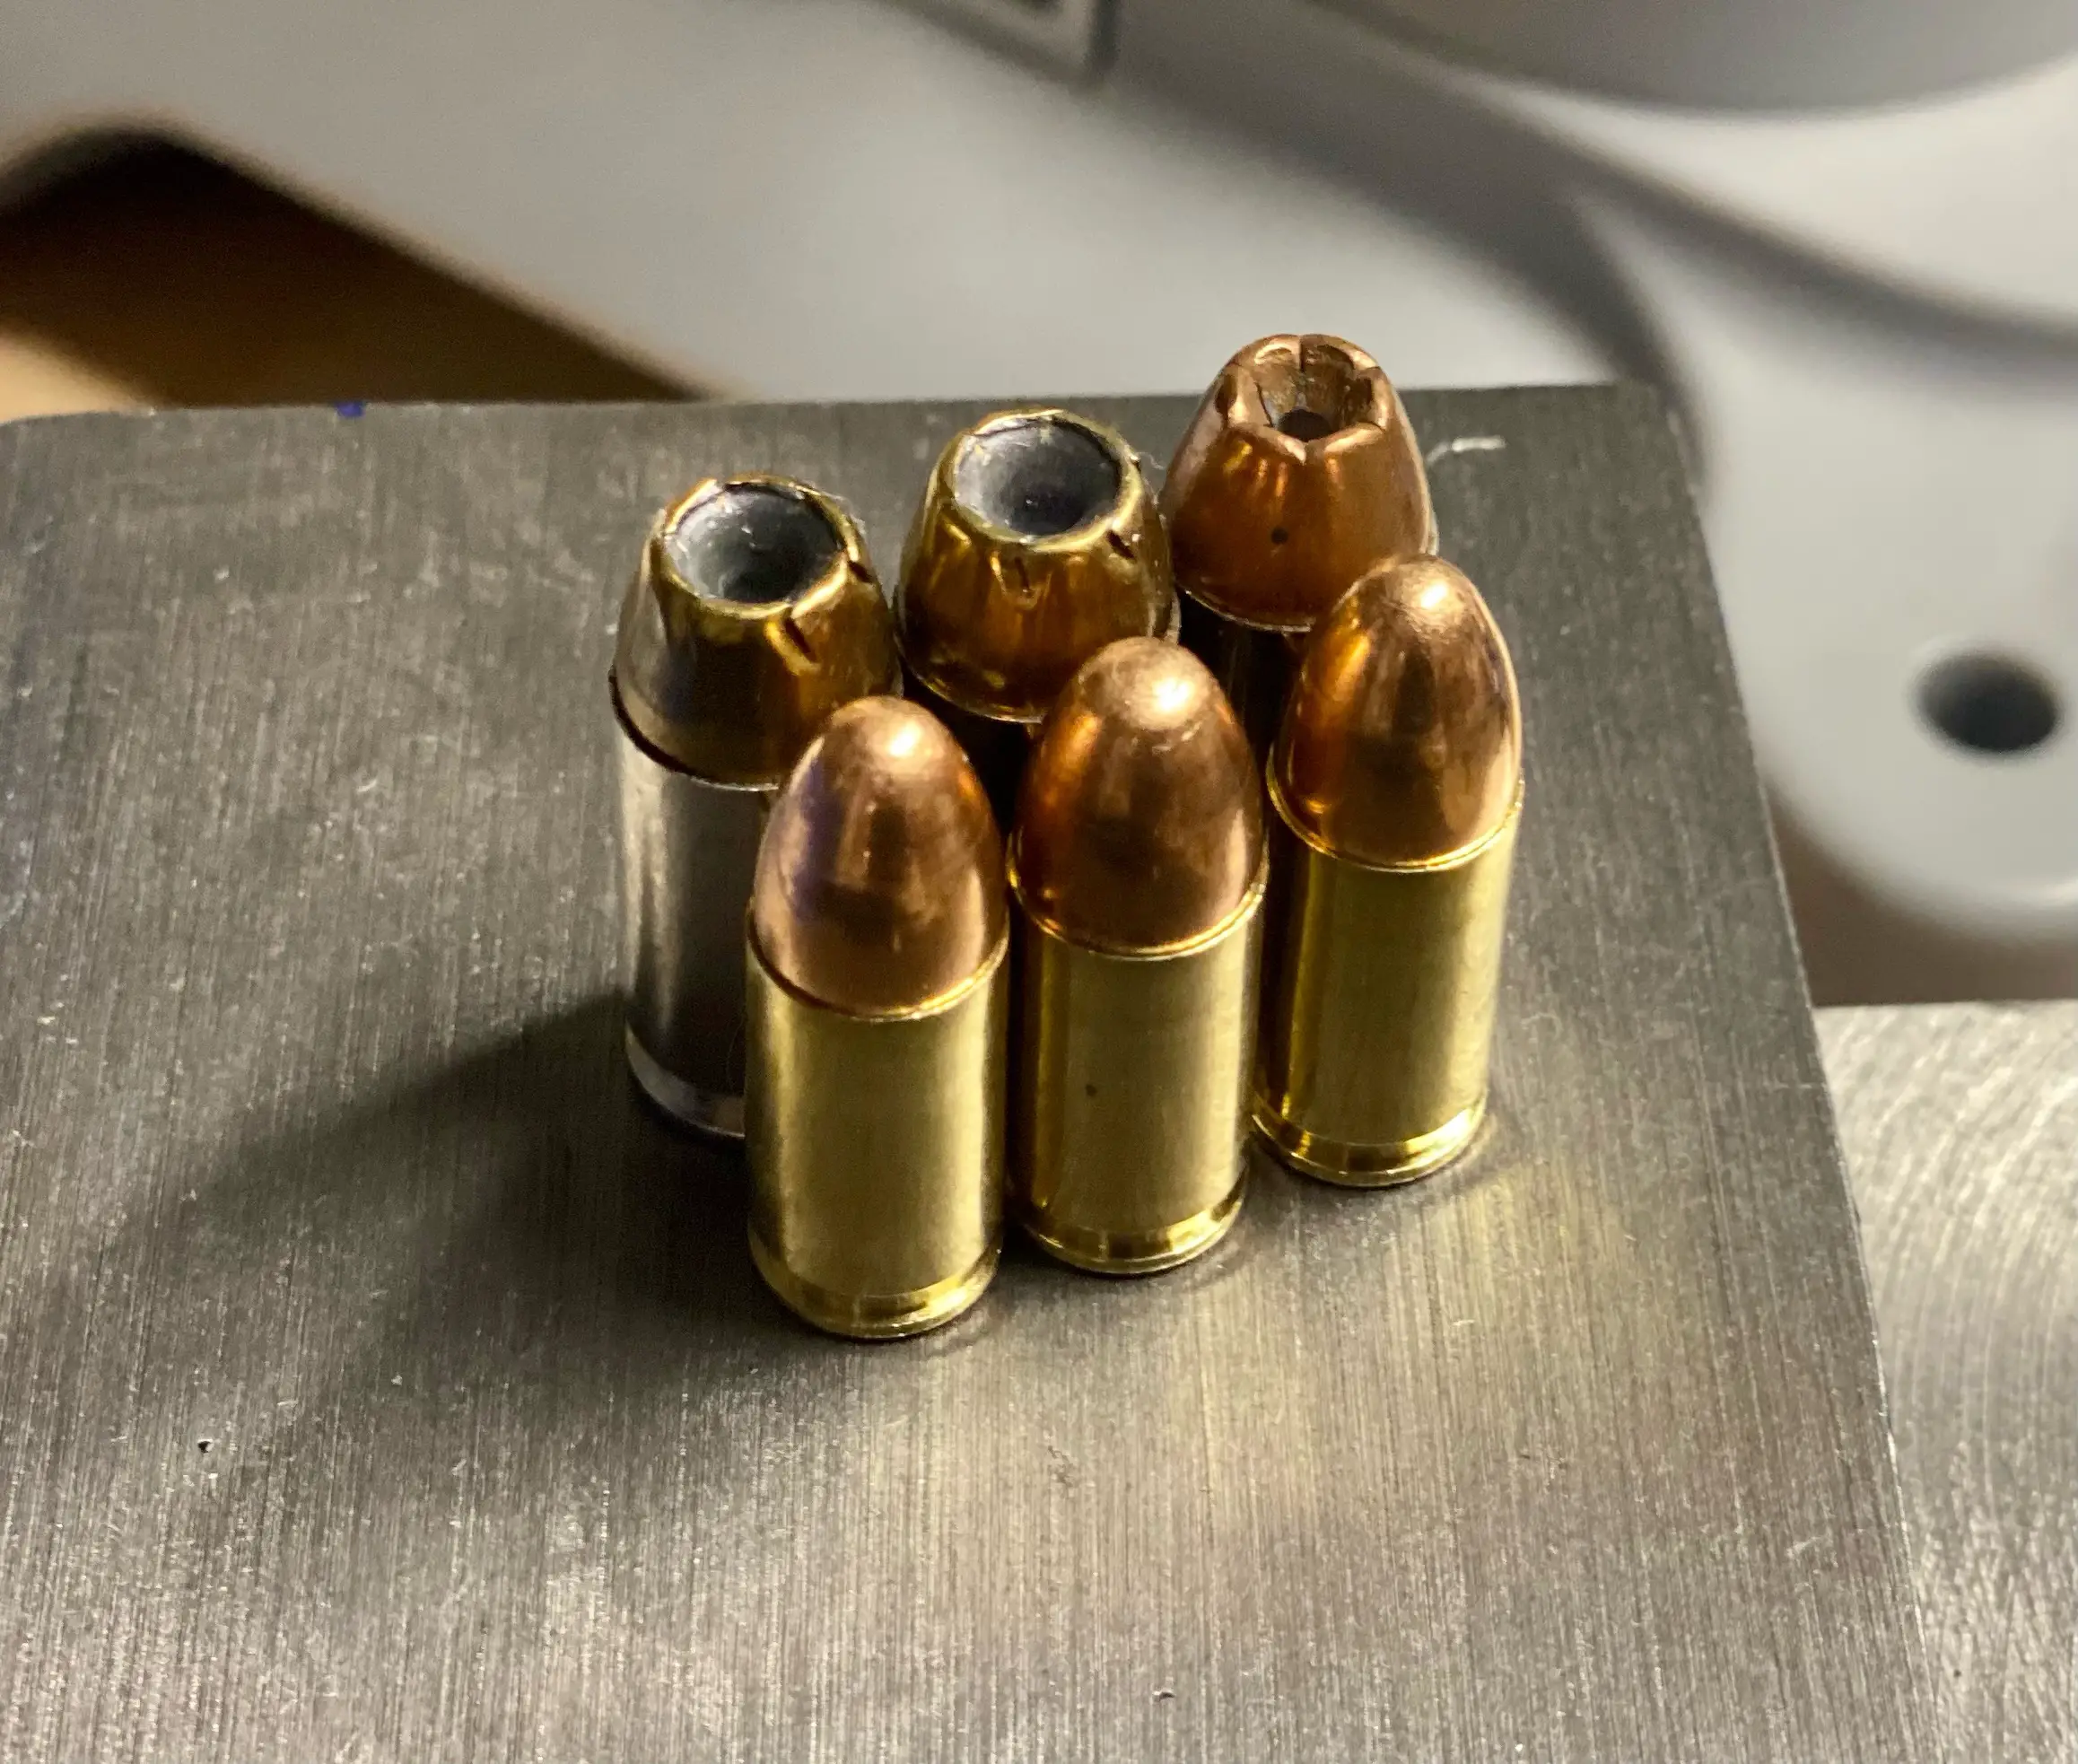 What is the difference between range ammo and defense ammo?